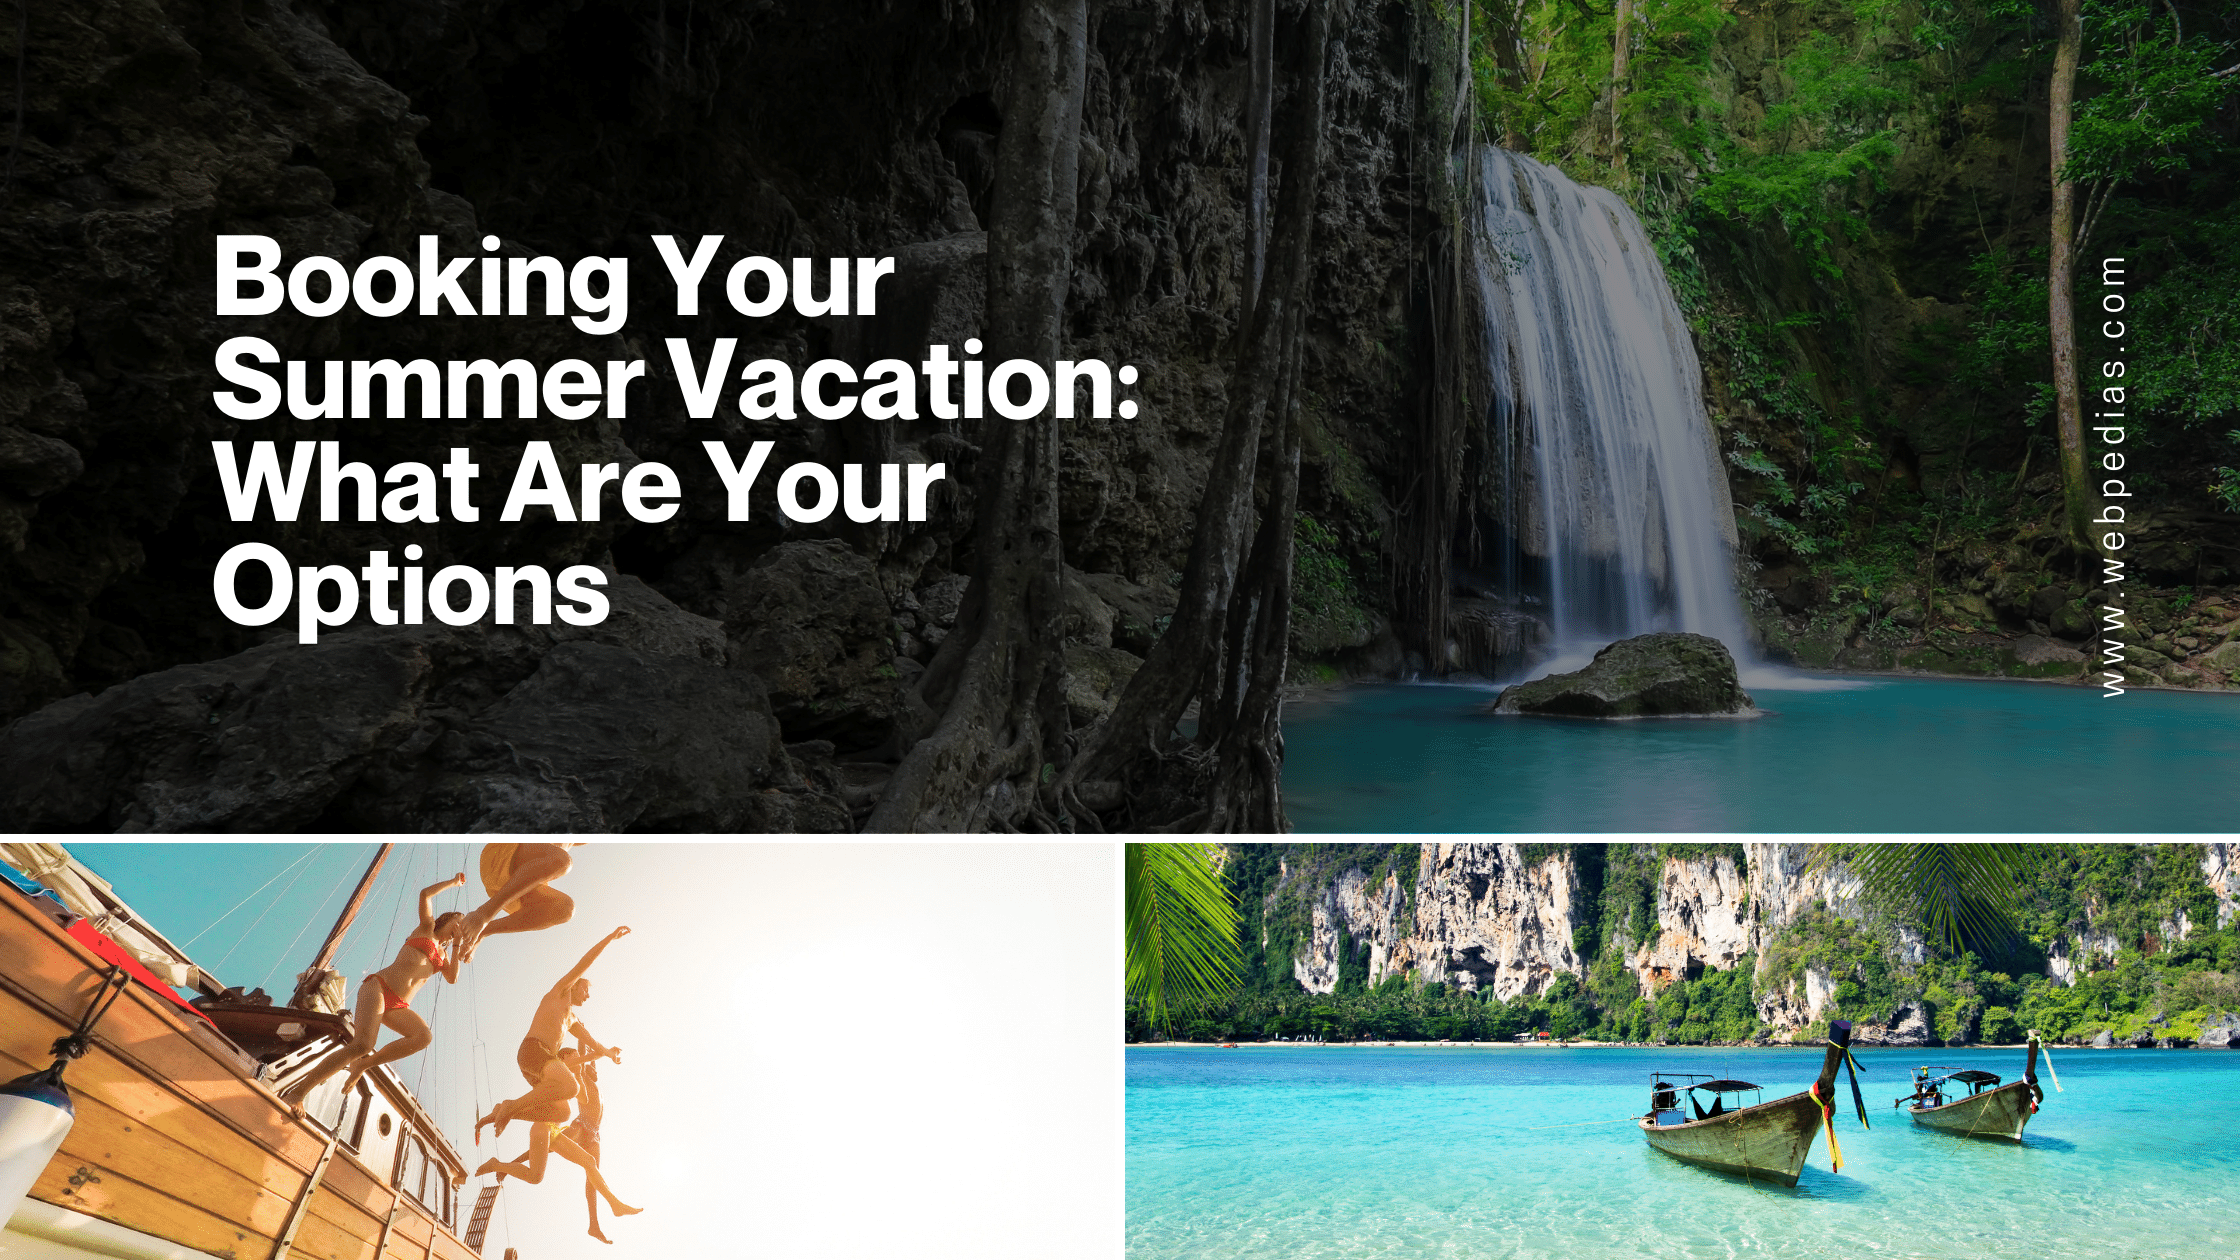 Booking Your Summer Vacation: What Are Your Options.